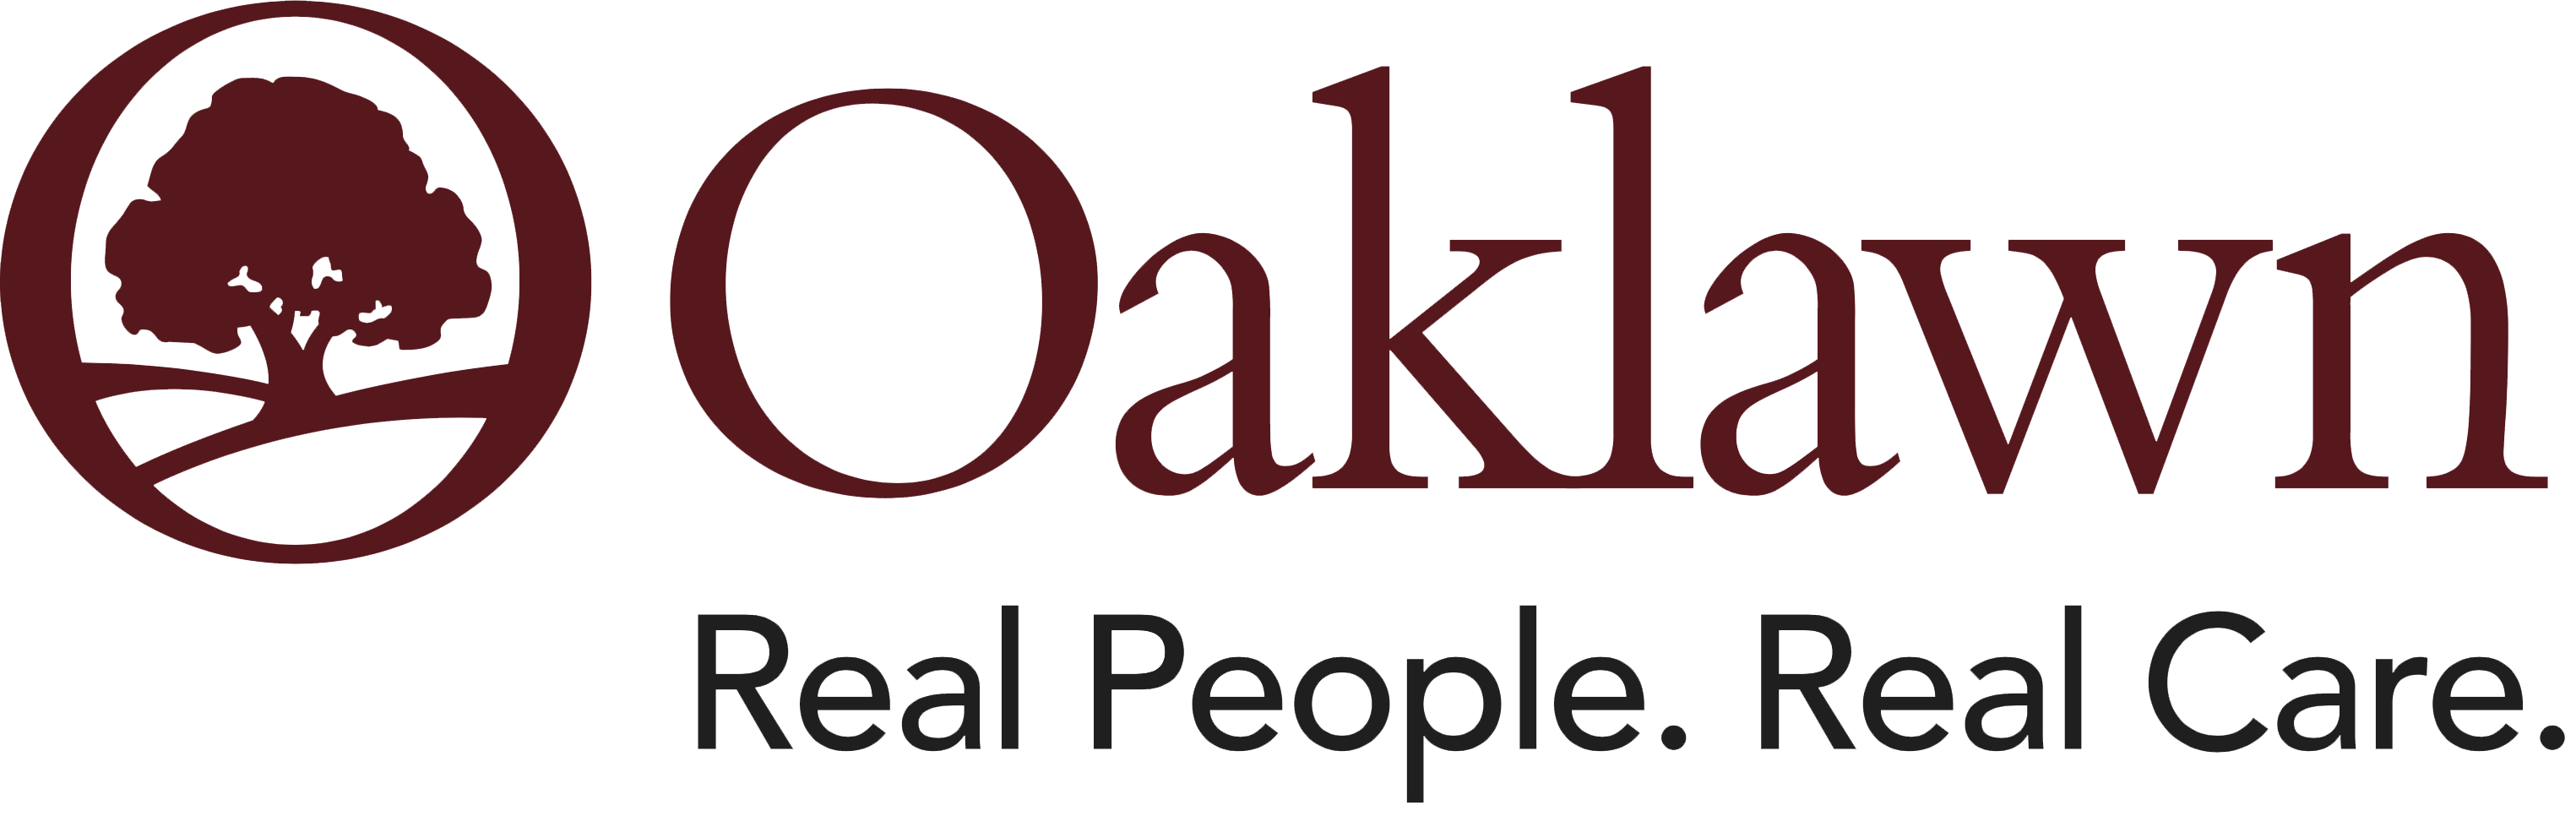 Oaklawn logo with slogan Real People. Real Care.